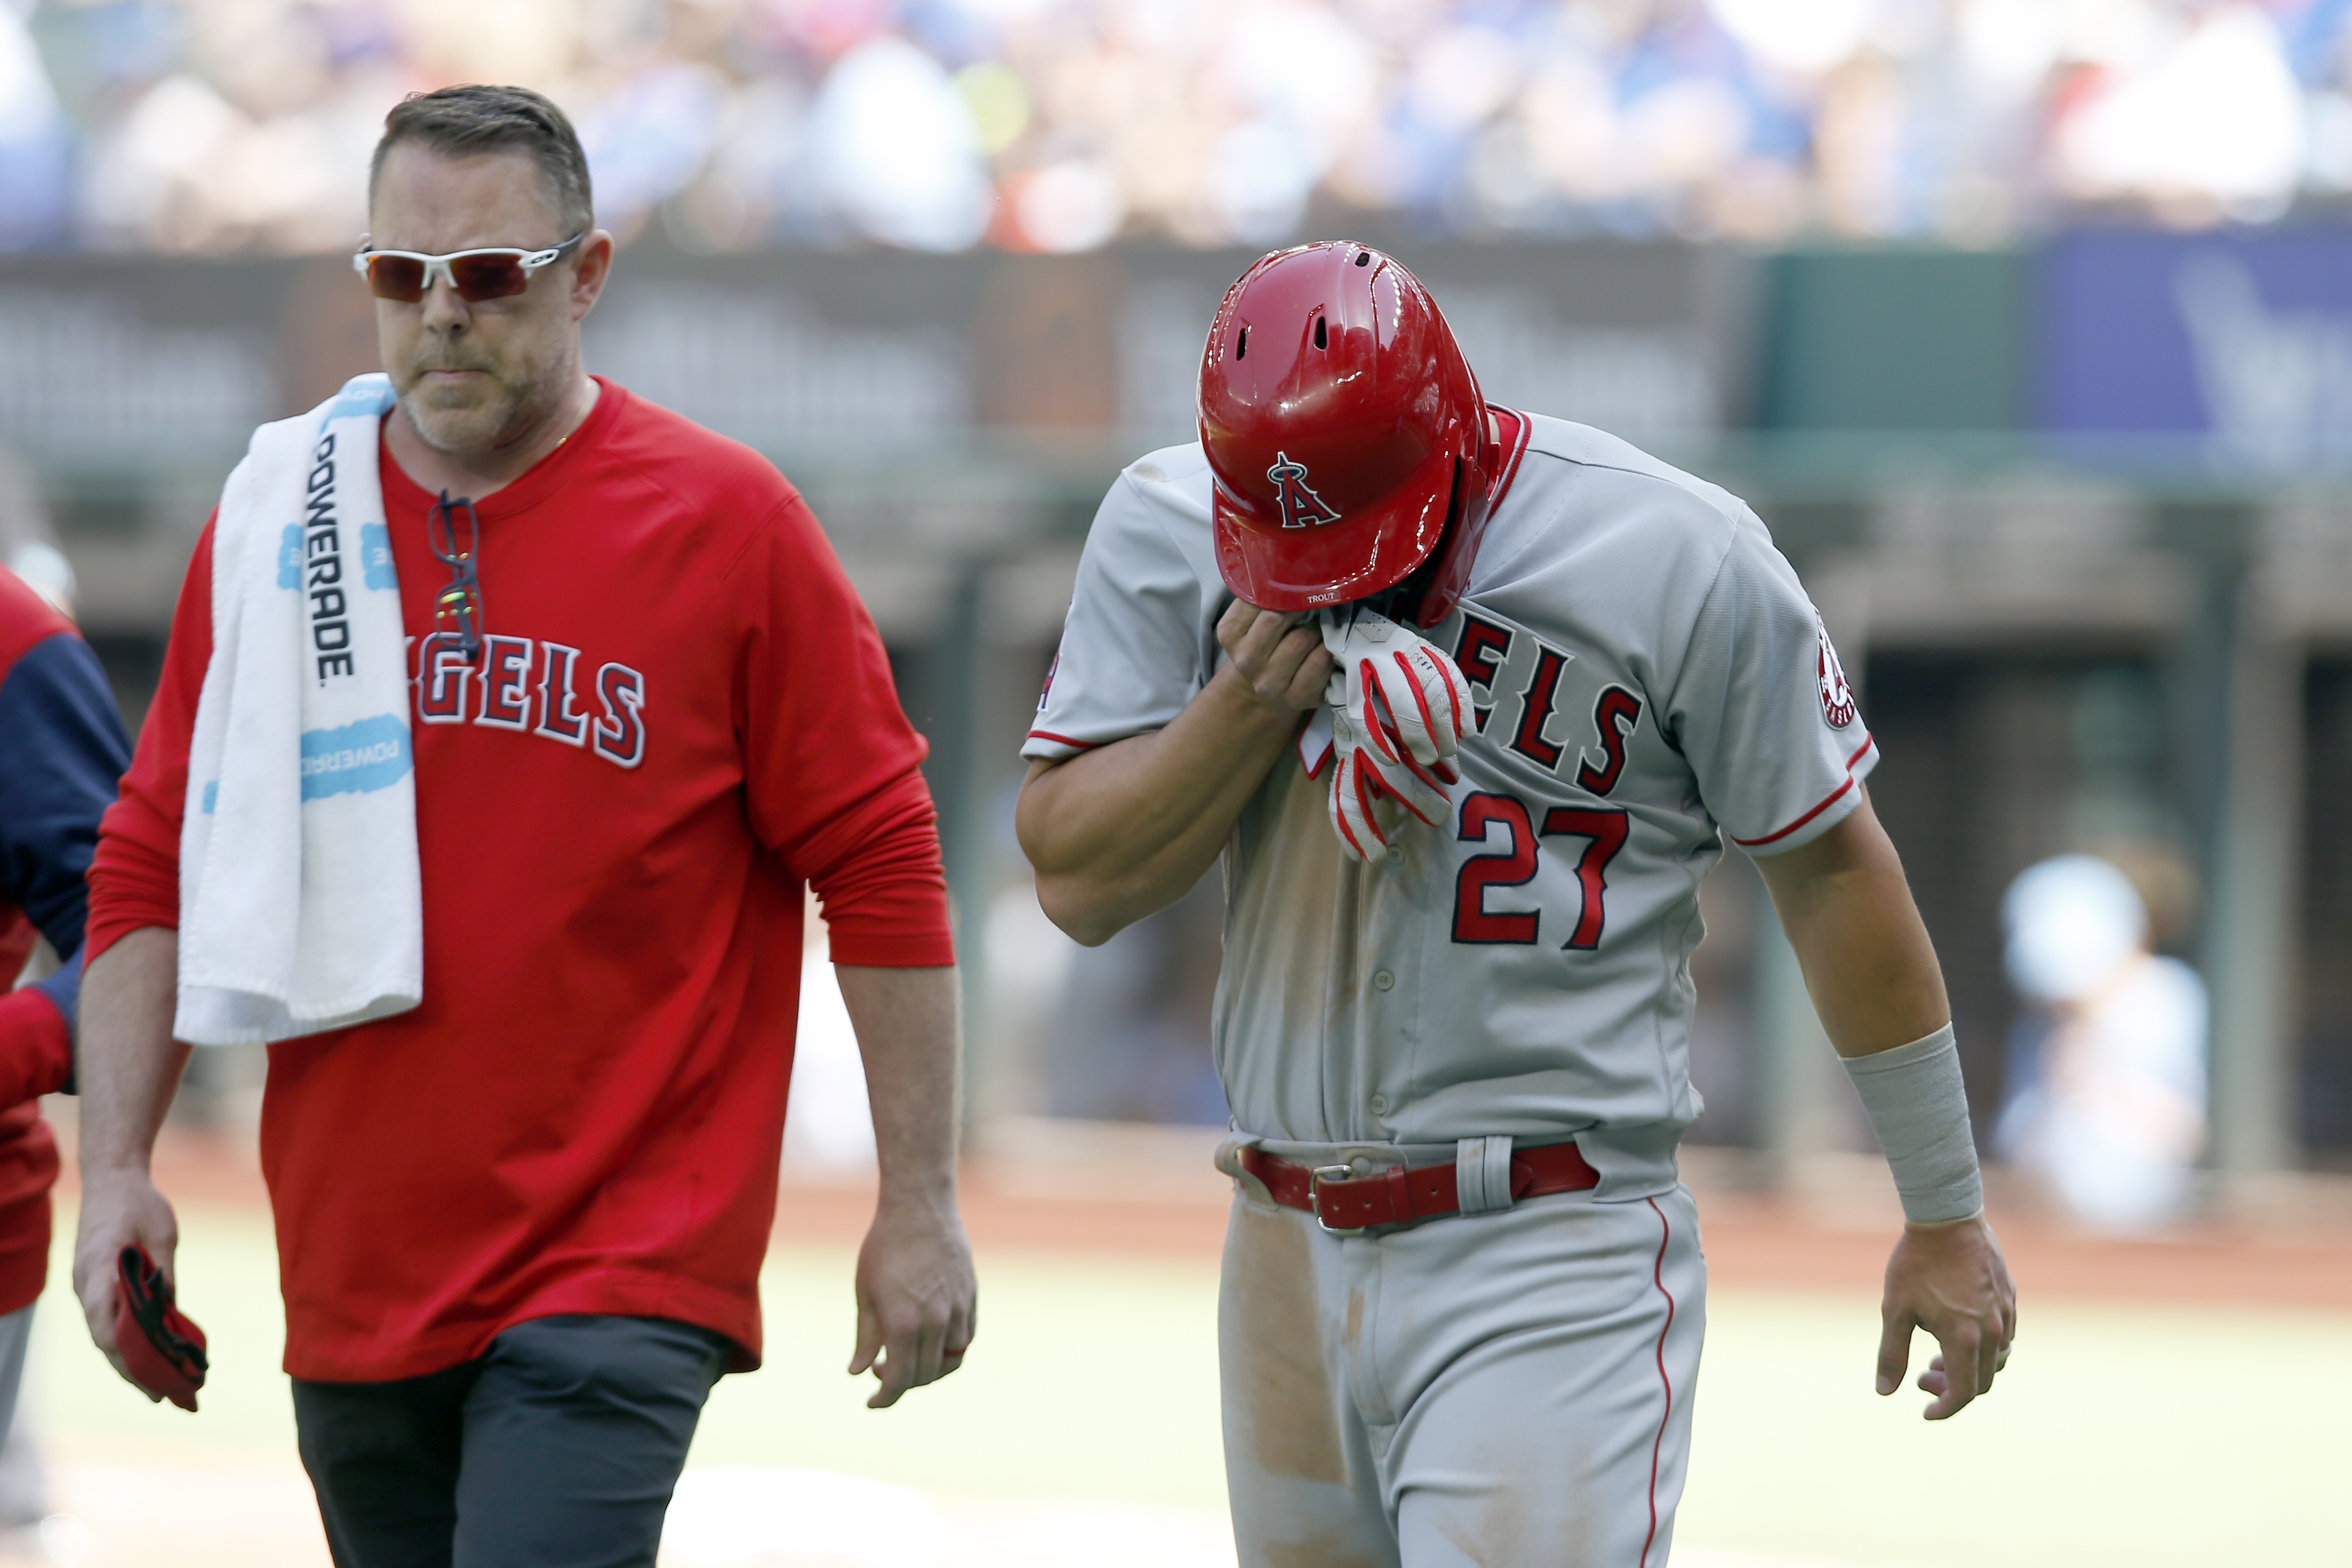 Mike Trout, one of the best players in baseball, is finally moving